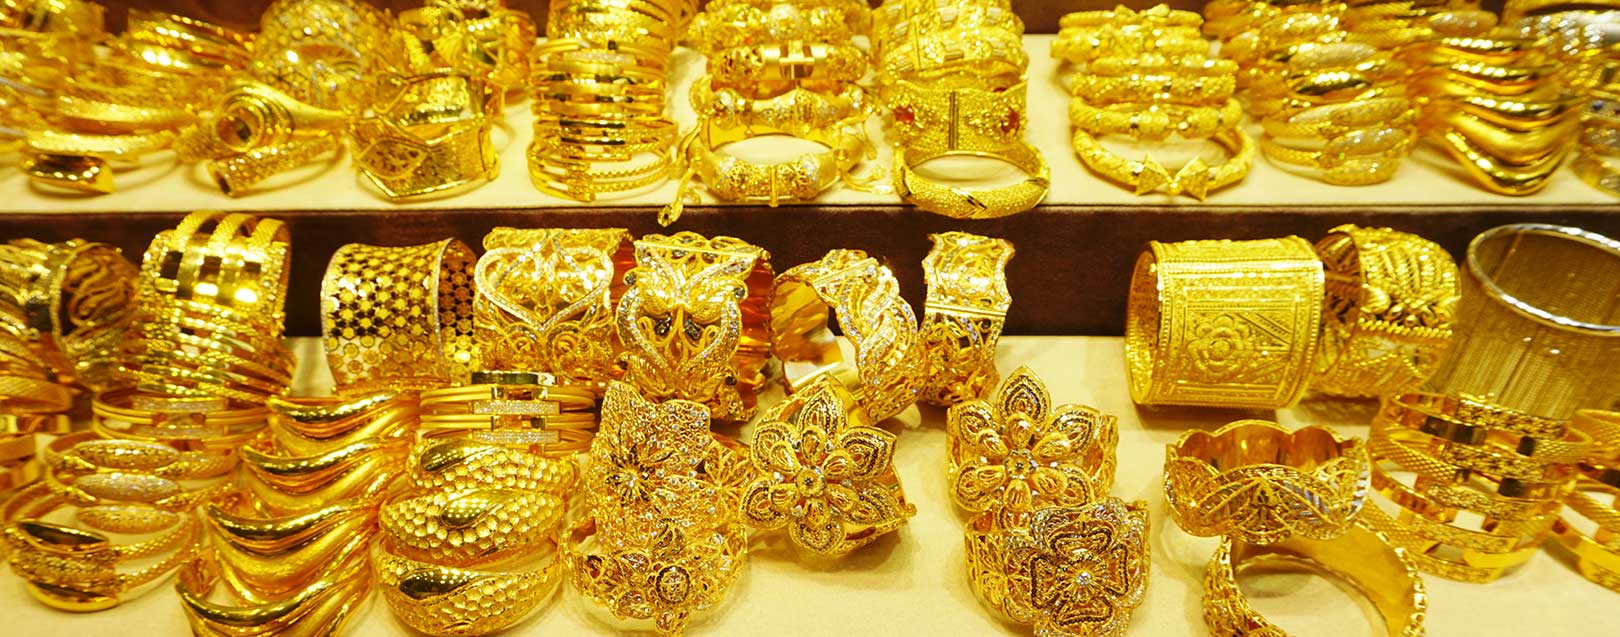 Commerce ministry urges the finance ministry to reduce import duty on gold to 2%